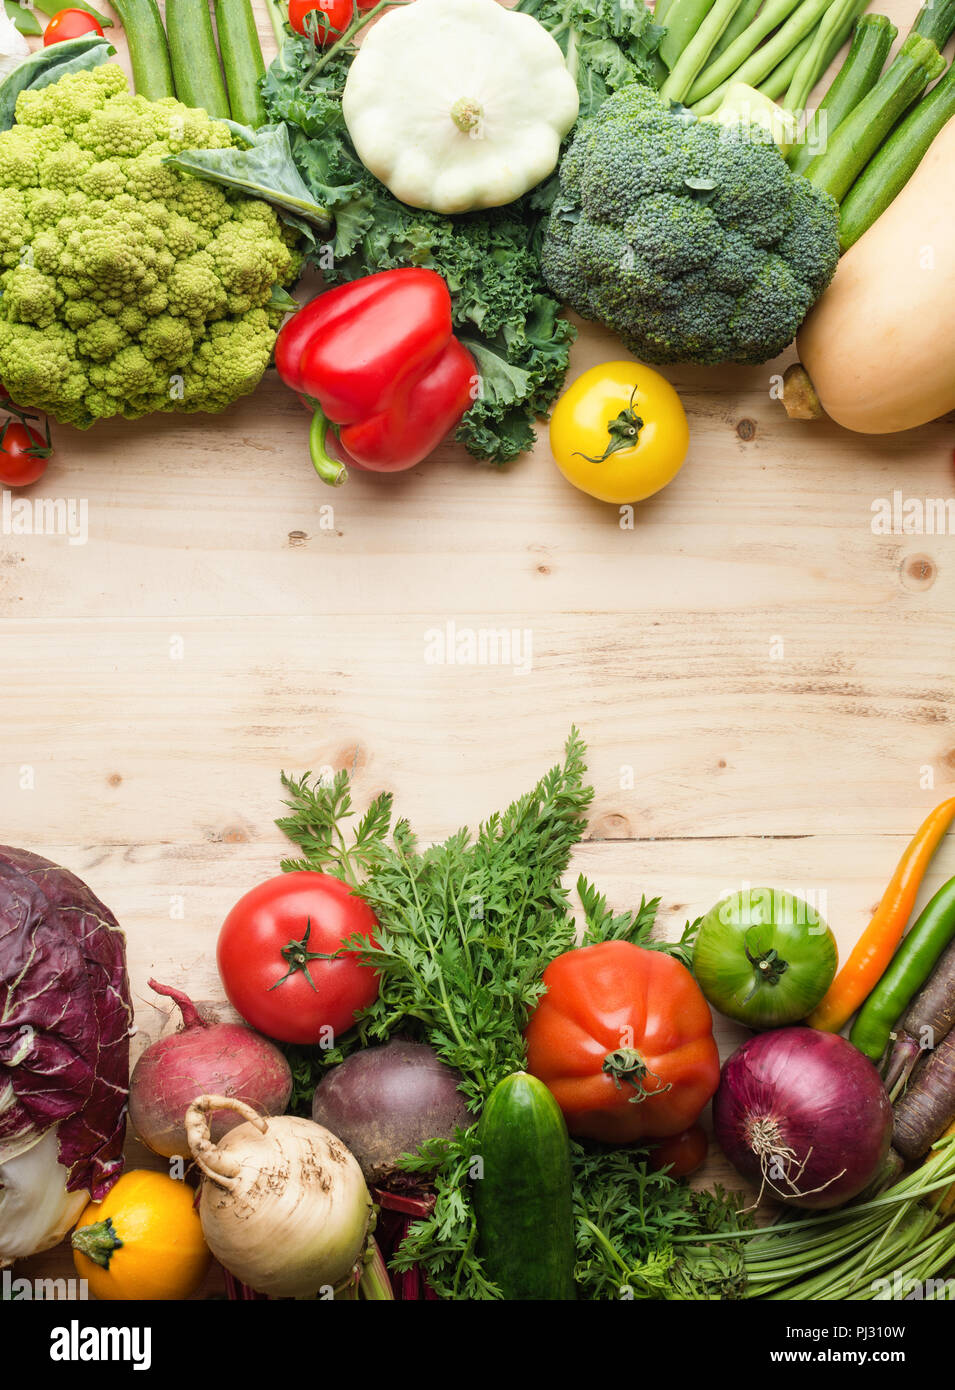 Fresh farm produce, organic vegetables and herbs on pine wooden table, healthy background, copy space for text in the middle, vertical, top view, selective focus Stock Photo